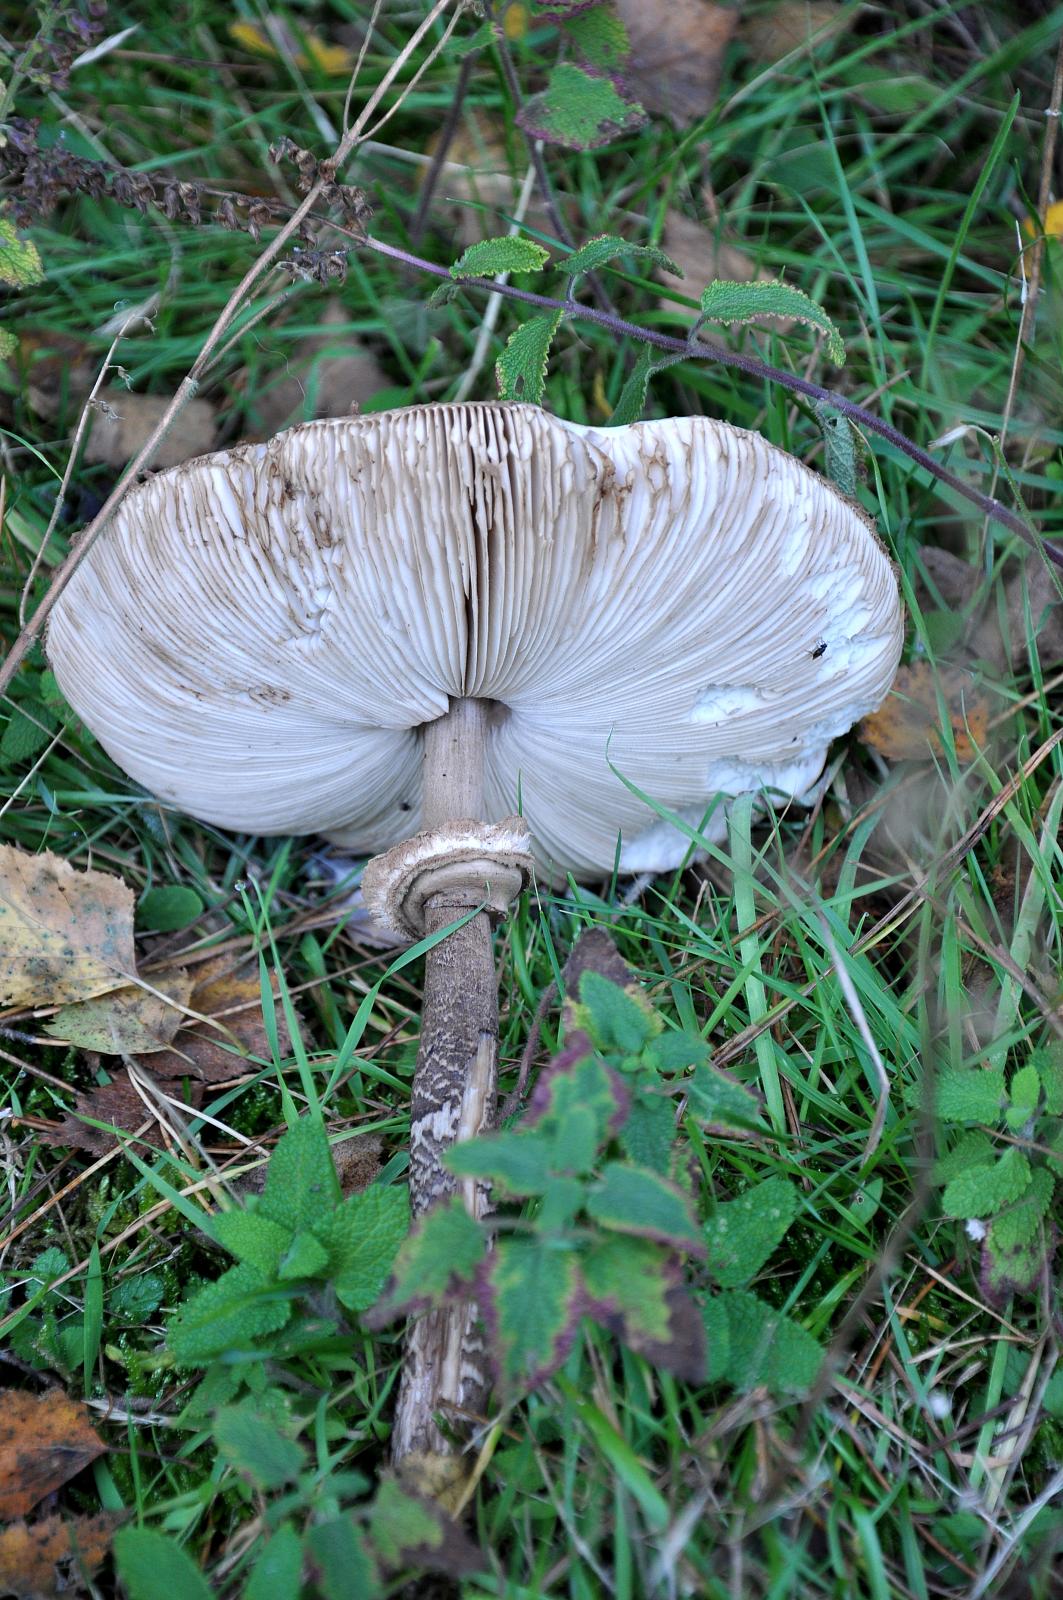 an image of a white mushroom that is growing in the grass